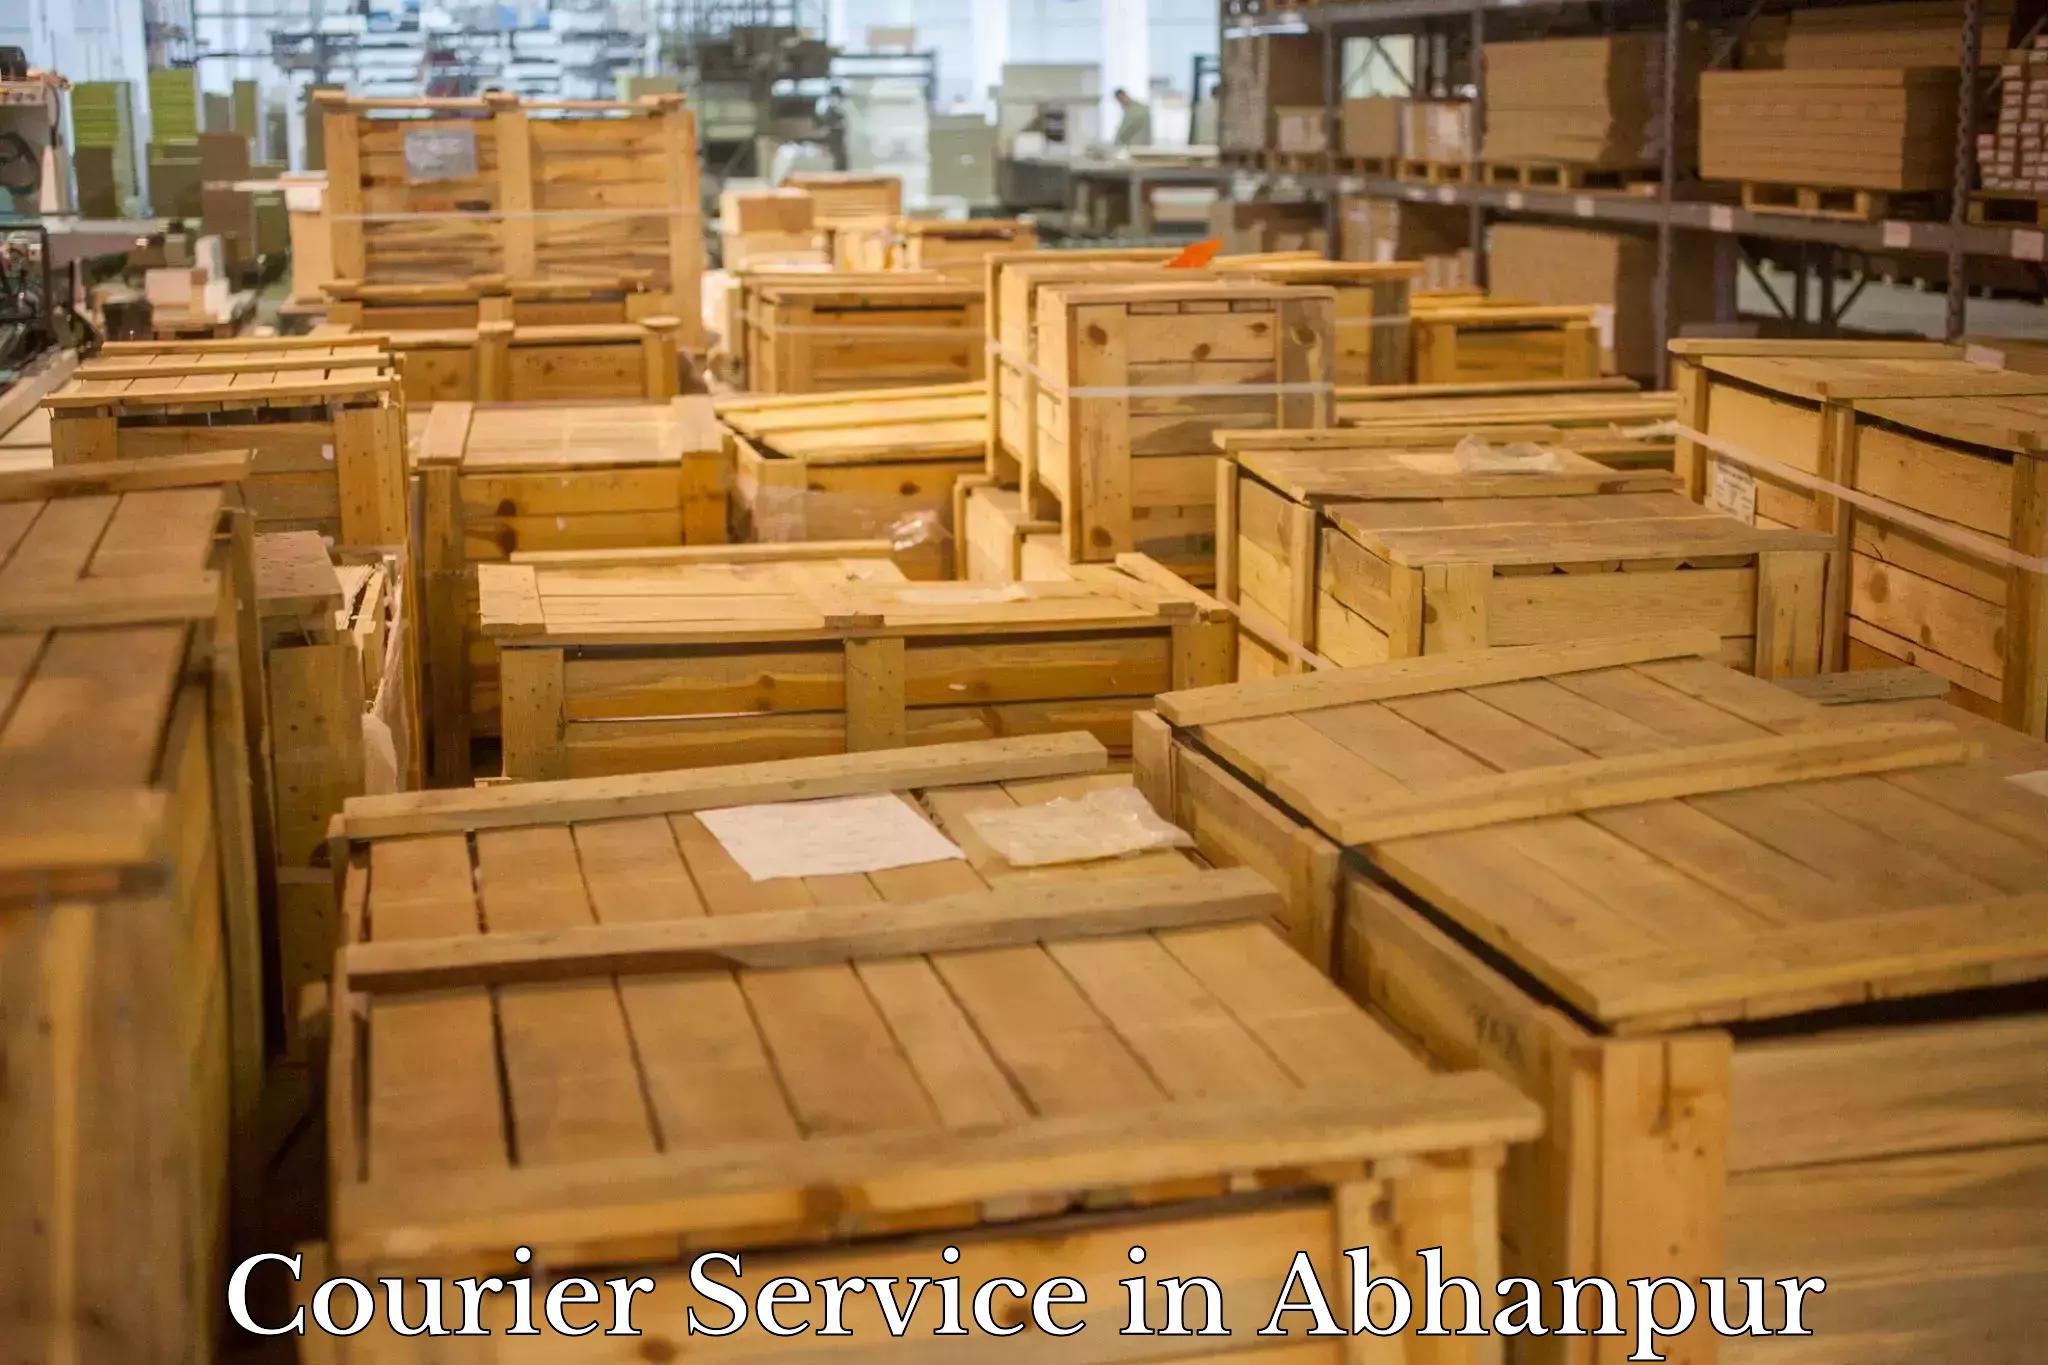 Secure freight services in Abhanpur